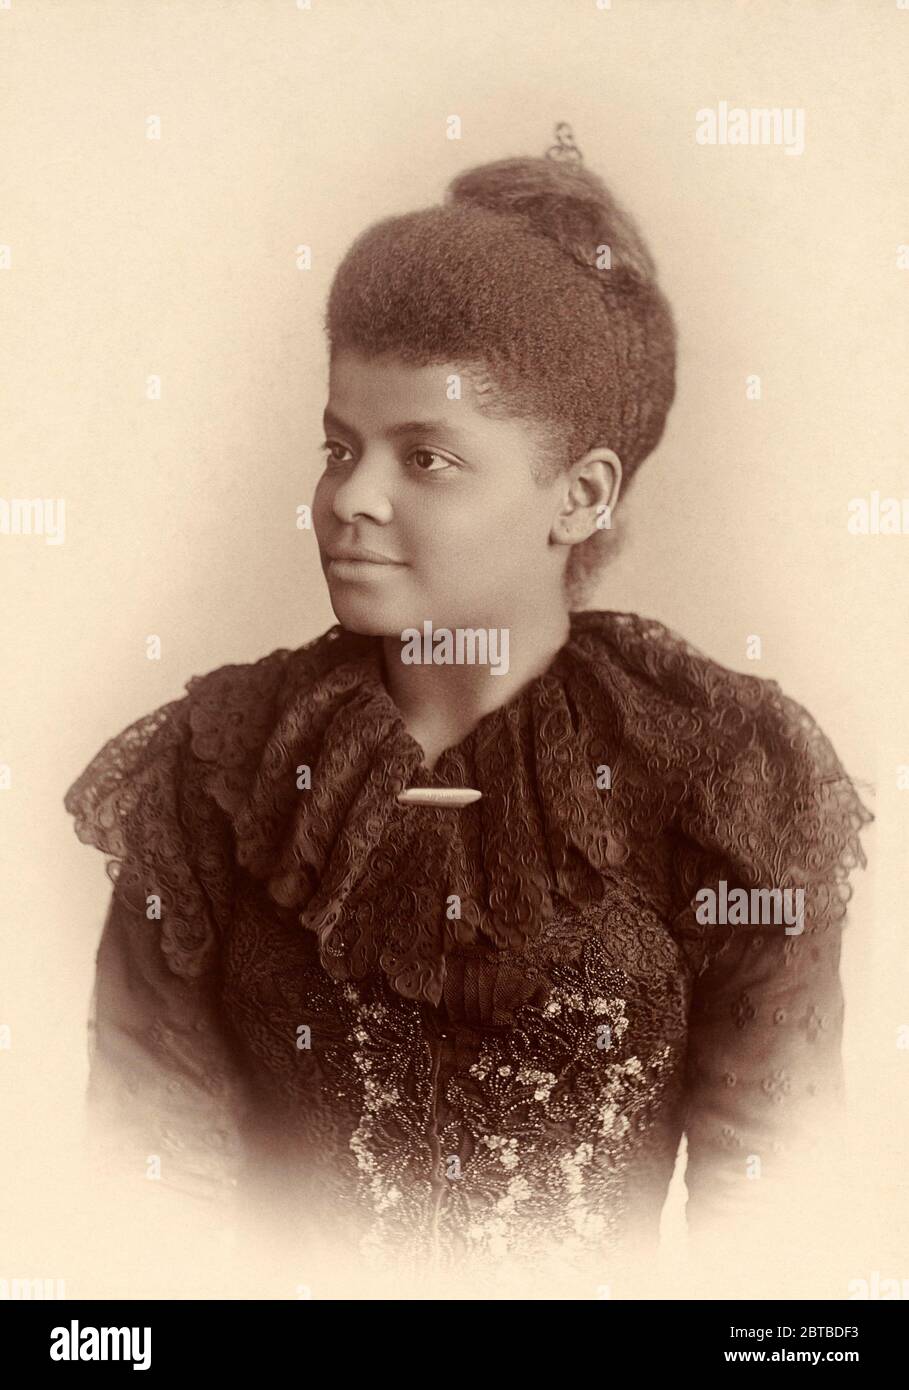 1893 , Chicago, USA : The  IDA B. WELLS ( Bell Wells-Barnett  , 1861 - 1931 ), photo by Miss Garrity , Chicago. American investigative journalist , educator and early leader in the civil rights movement . She was one of the founders of the National Association for the Advancement of Colored People ( NAACP ).Wells arguably became the most famous black woman in America, during a life that was centered on combating prejudice and violence, who fought for equality for African Americans , especially women .- Wells Barnett - Movimento diritti civili - Gente di Colore - AFRO-AMERICANI - Afro Americani Stock Photo